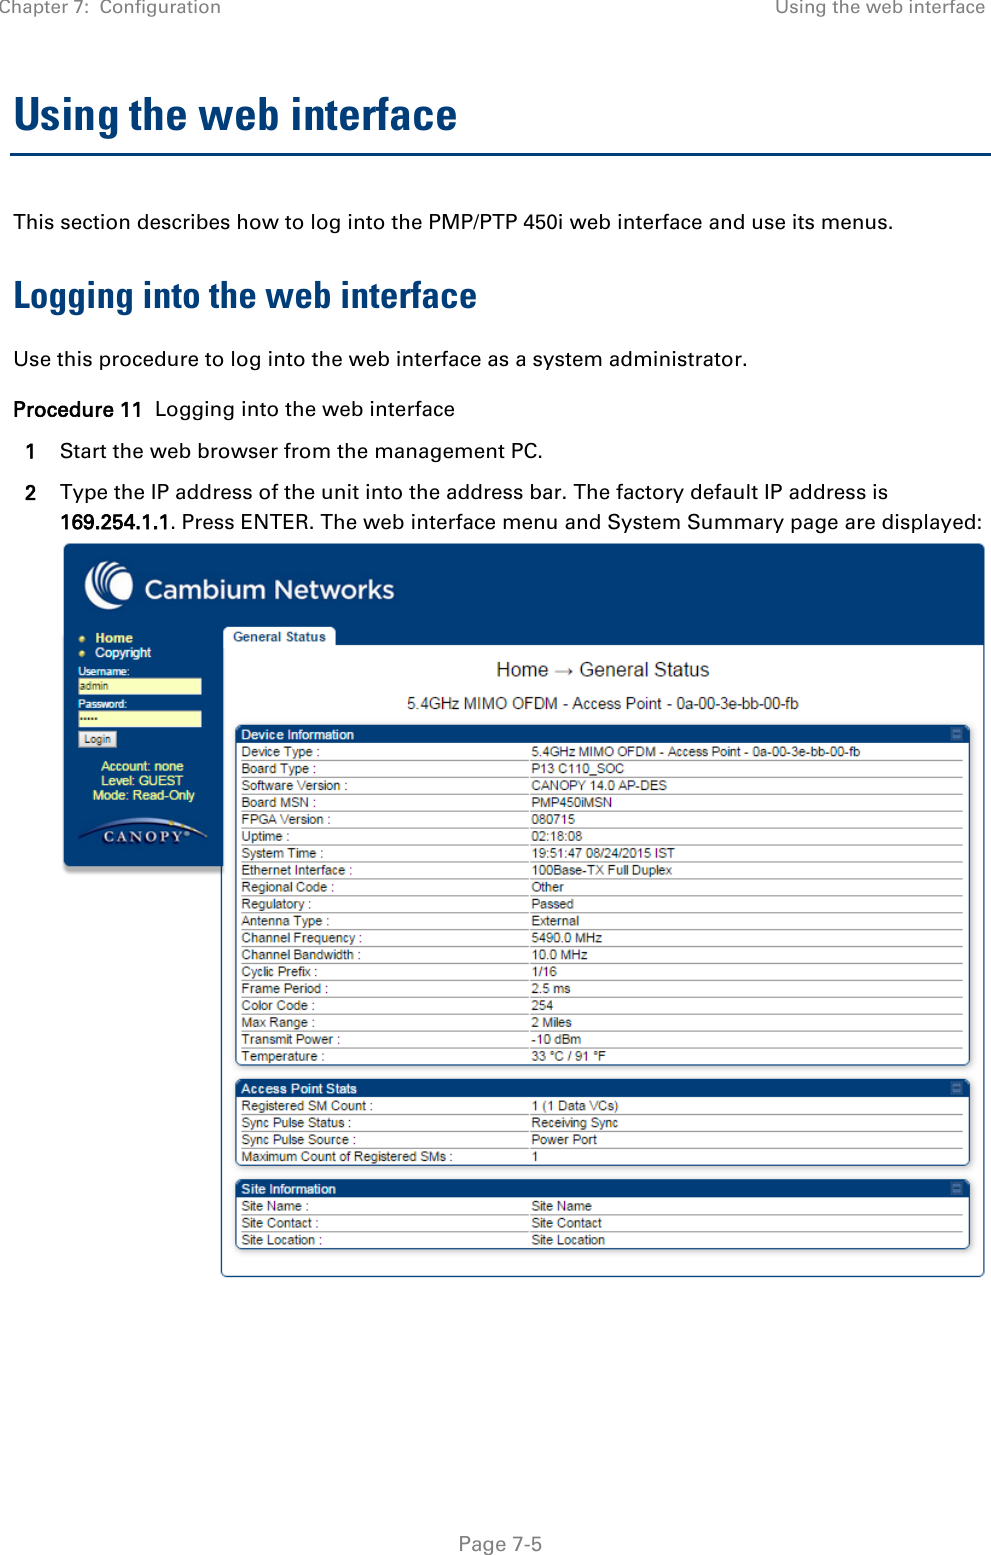 Chapter 7:  Configuration Using the web interface   Page 7-5 Using the web interface This section describes how to log into the PMP/PTP 450i web interface and use its menus. Logging into the web interface Use this procedure to log into the web interface as a system administrator. Procedure 11  Logging into the web interface 1 Start the web browser from the management PC. 2 Type the IP address of the unit into the address bar. The factory default IP address is 169.254.1.1. Press ENTER. The web interface menu and System Summary page are displayed:  